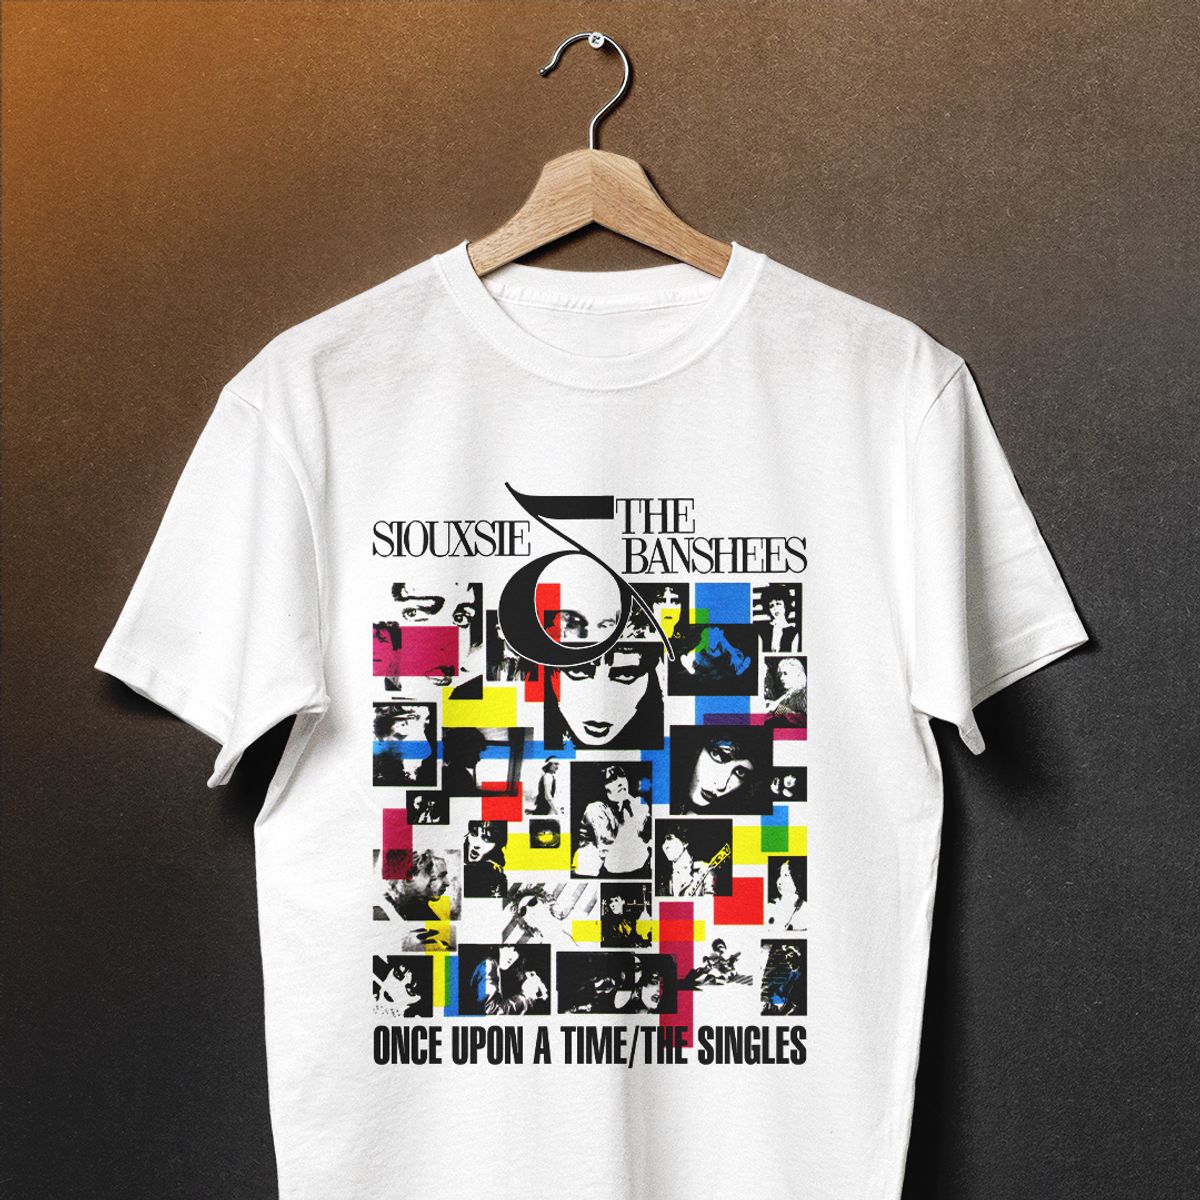 Nome do produto: Camiseta Siouxsie and the Banshees - Once Upon a Time